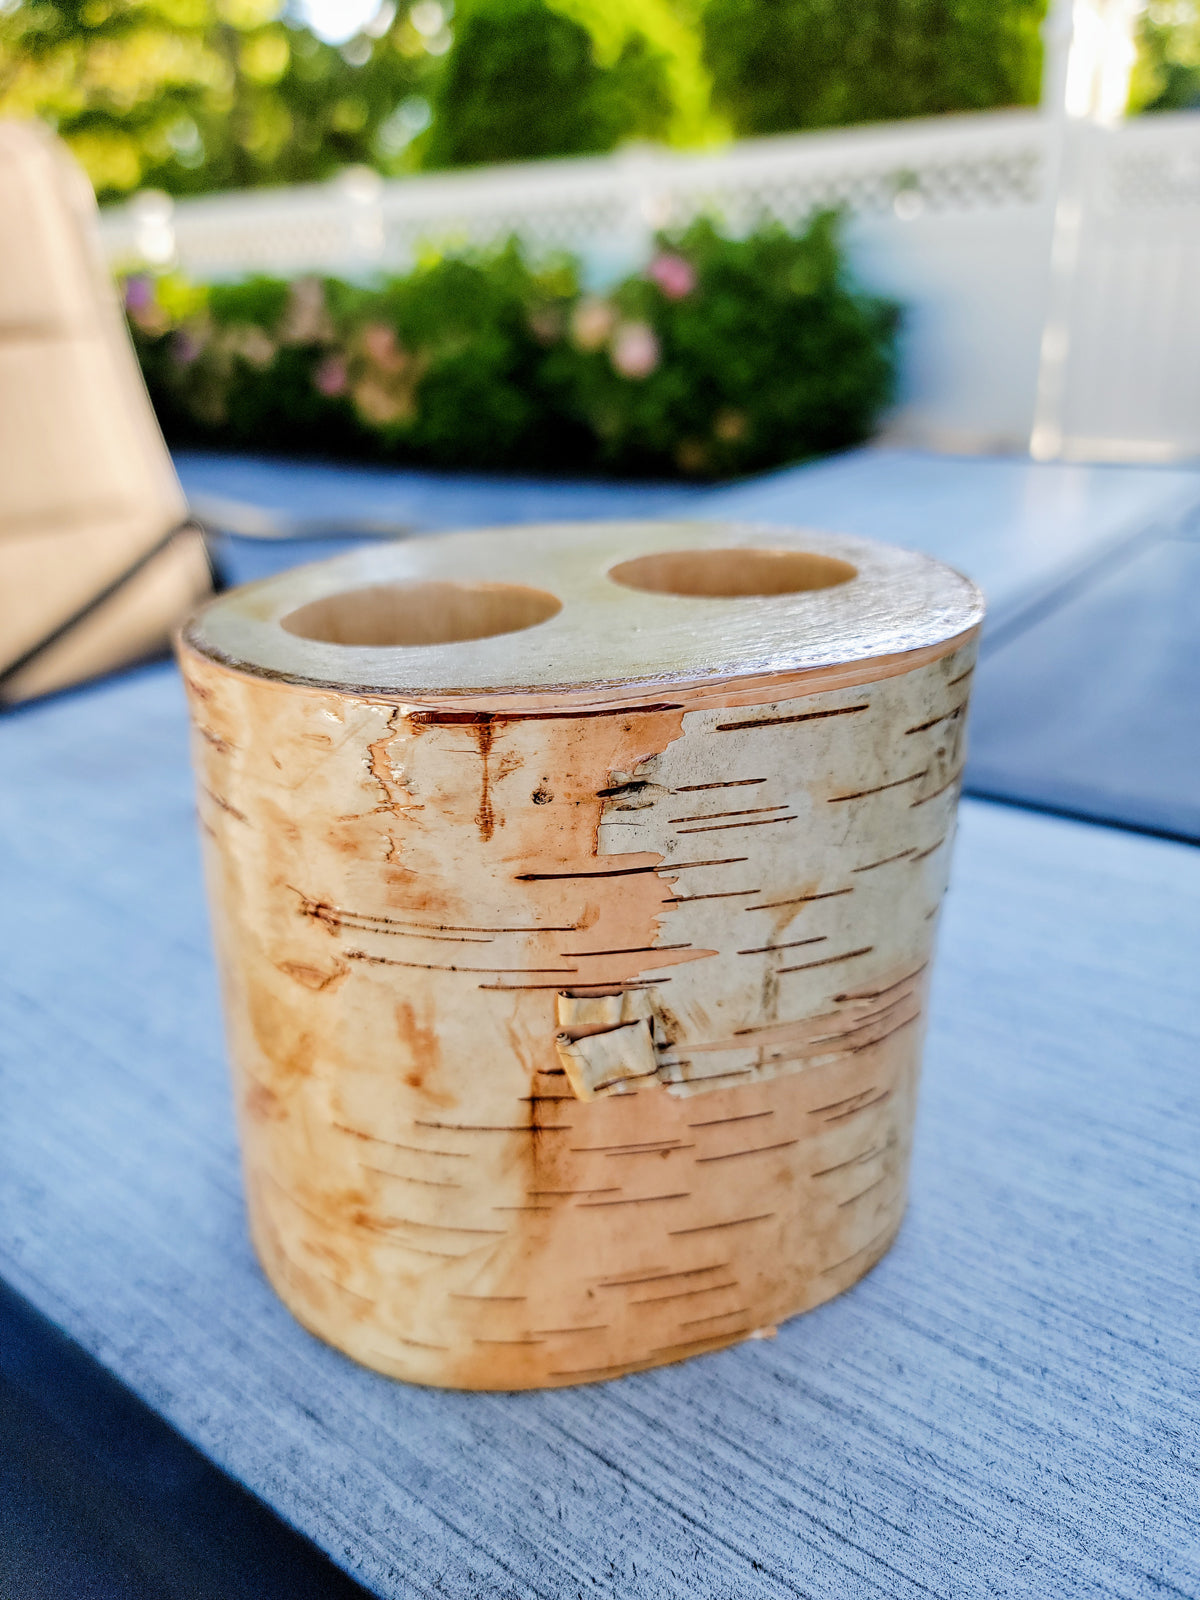 Natural Birch Wood Planter with Greenery, Lifestyle